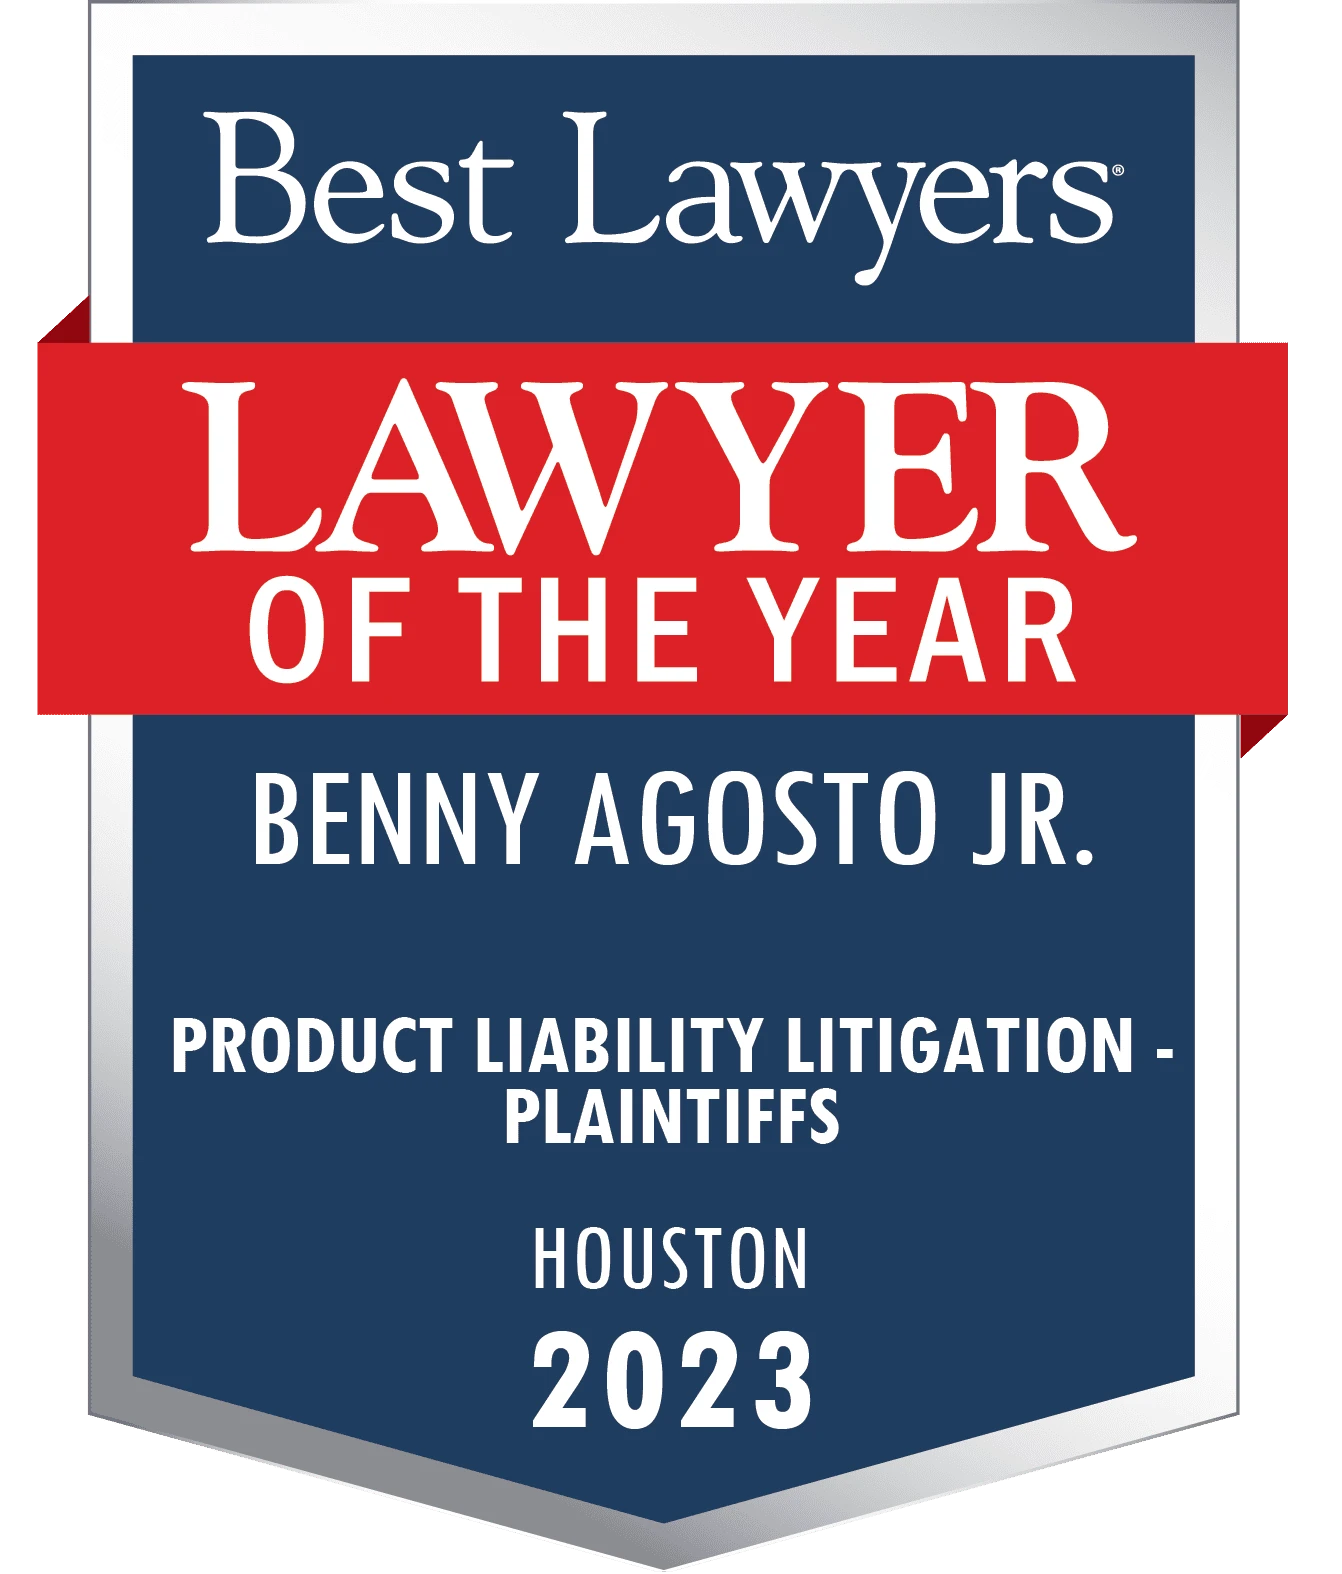 Best Lawyers Lawyer Of The Year Award for Benny Agosto Jr